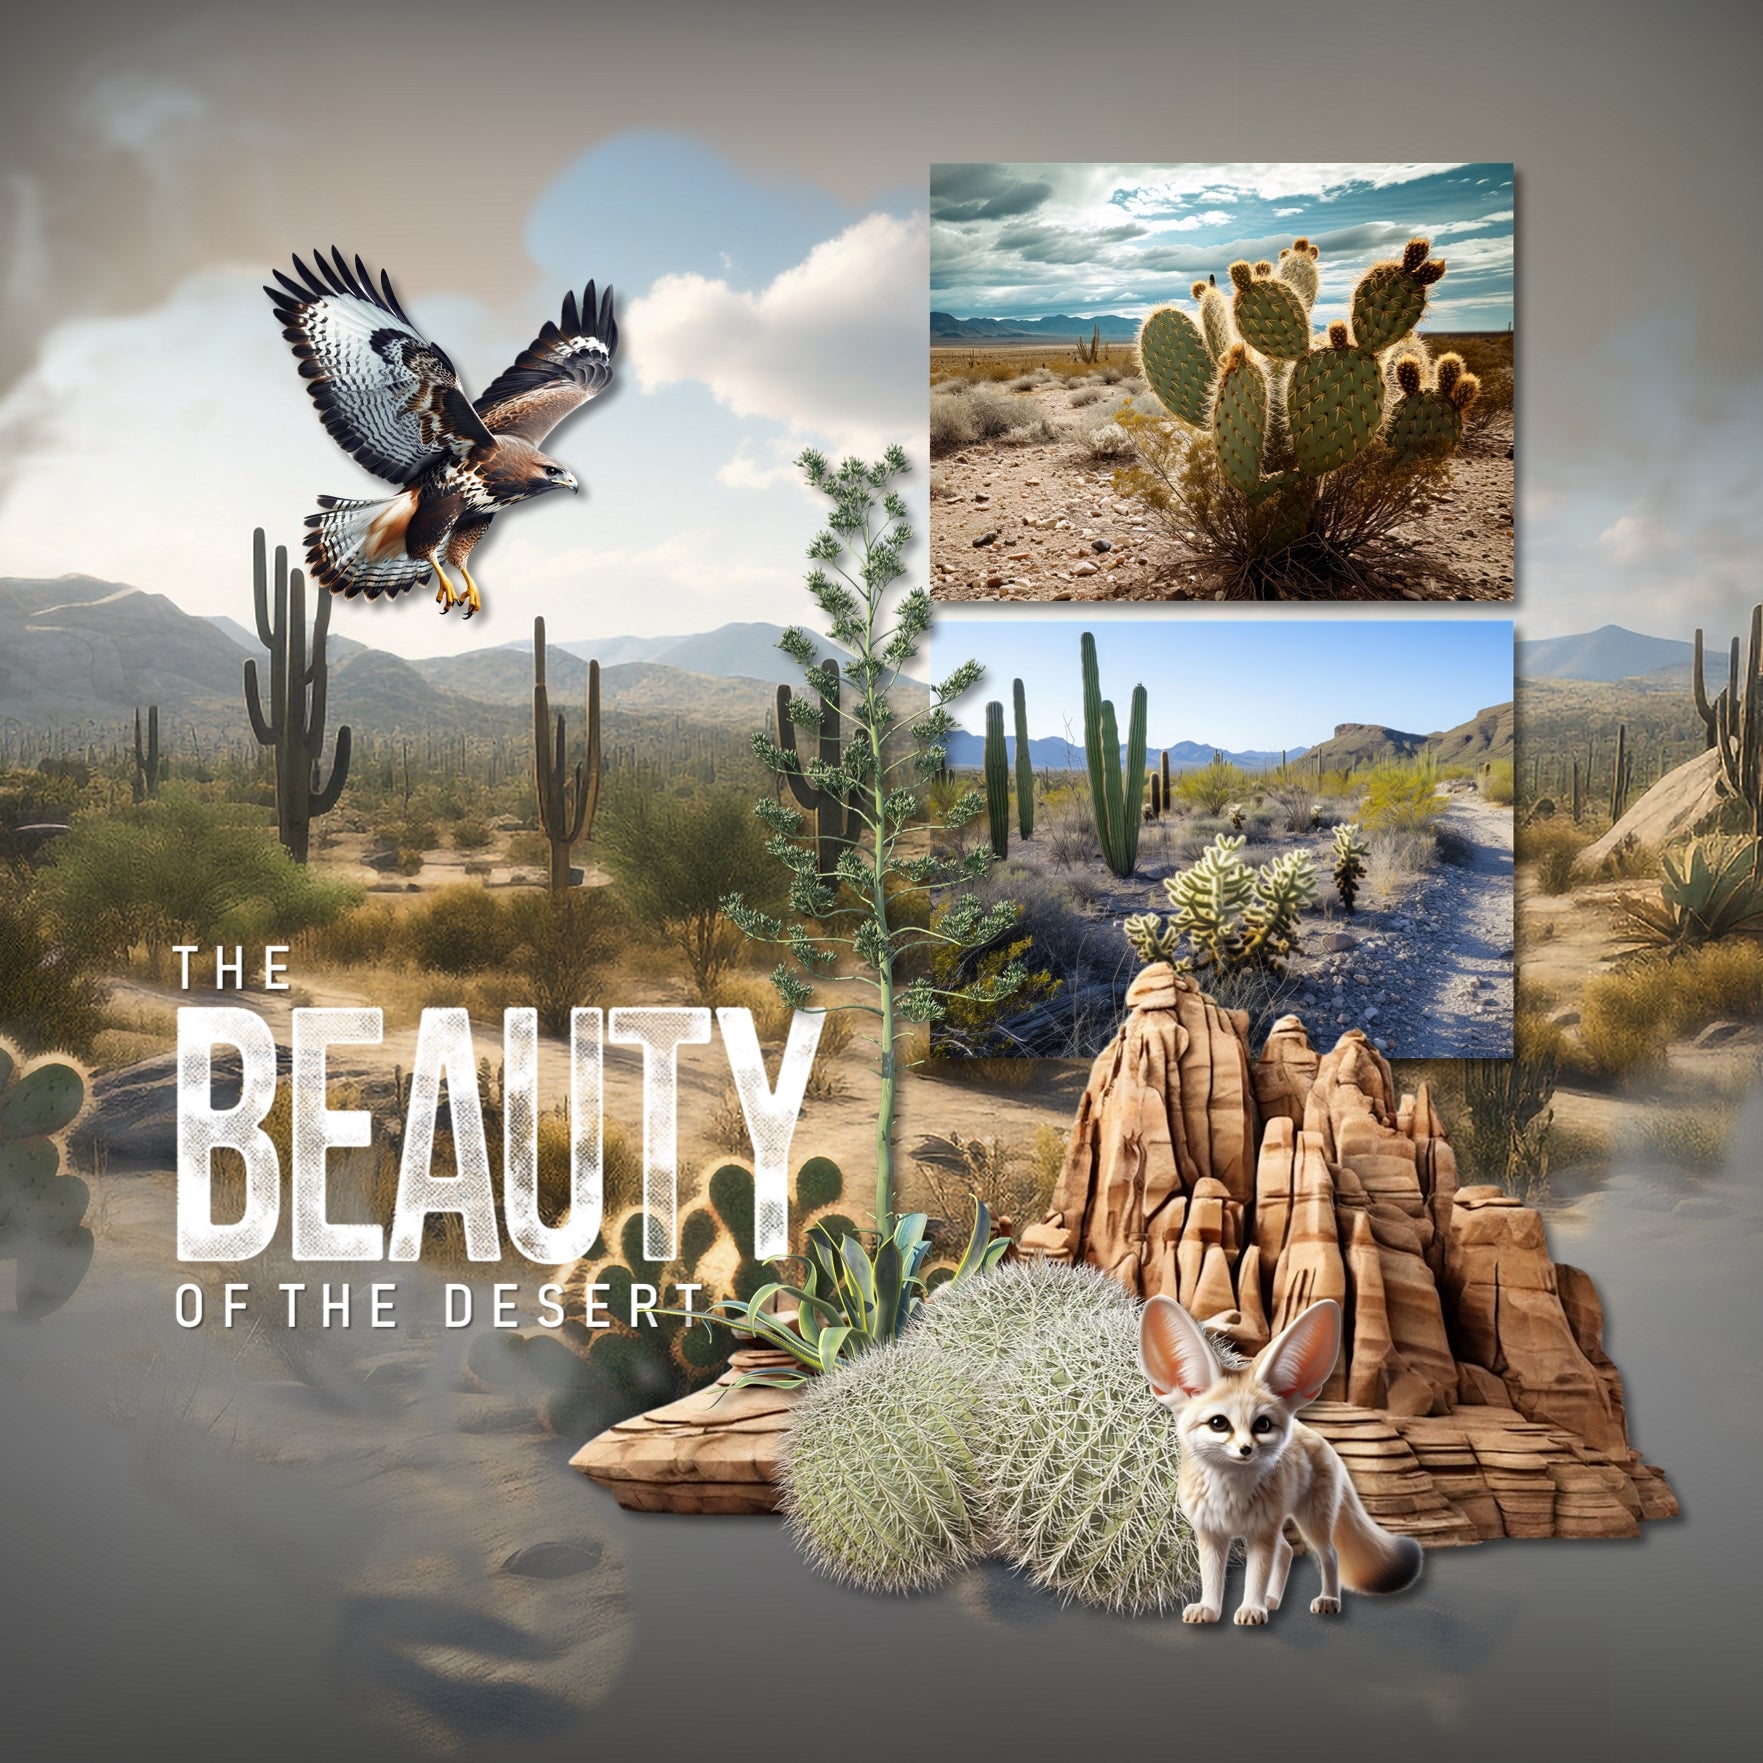 Explore nature and the outdoors with these beautiful digital scrapbooking desert embellishments by Lucky Girl Creative digital art. Great for desert, the Southwest, Mexico, California, Texas, Colorado, Arizona, New Mexico, Utah, Wyoming, and more! The Desert Flora & Fauna Elements is included in the Desert Flora & Fauna Mega Bundle. Embellishments include armadillo, big horn sheep, ram, dove, hawk, quail, vulture, buzzard, camel, cougar, mountain lion, and more.